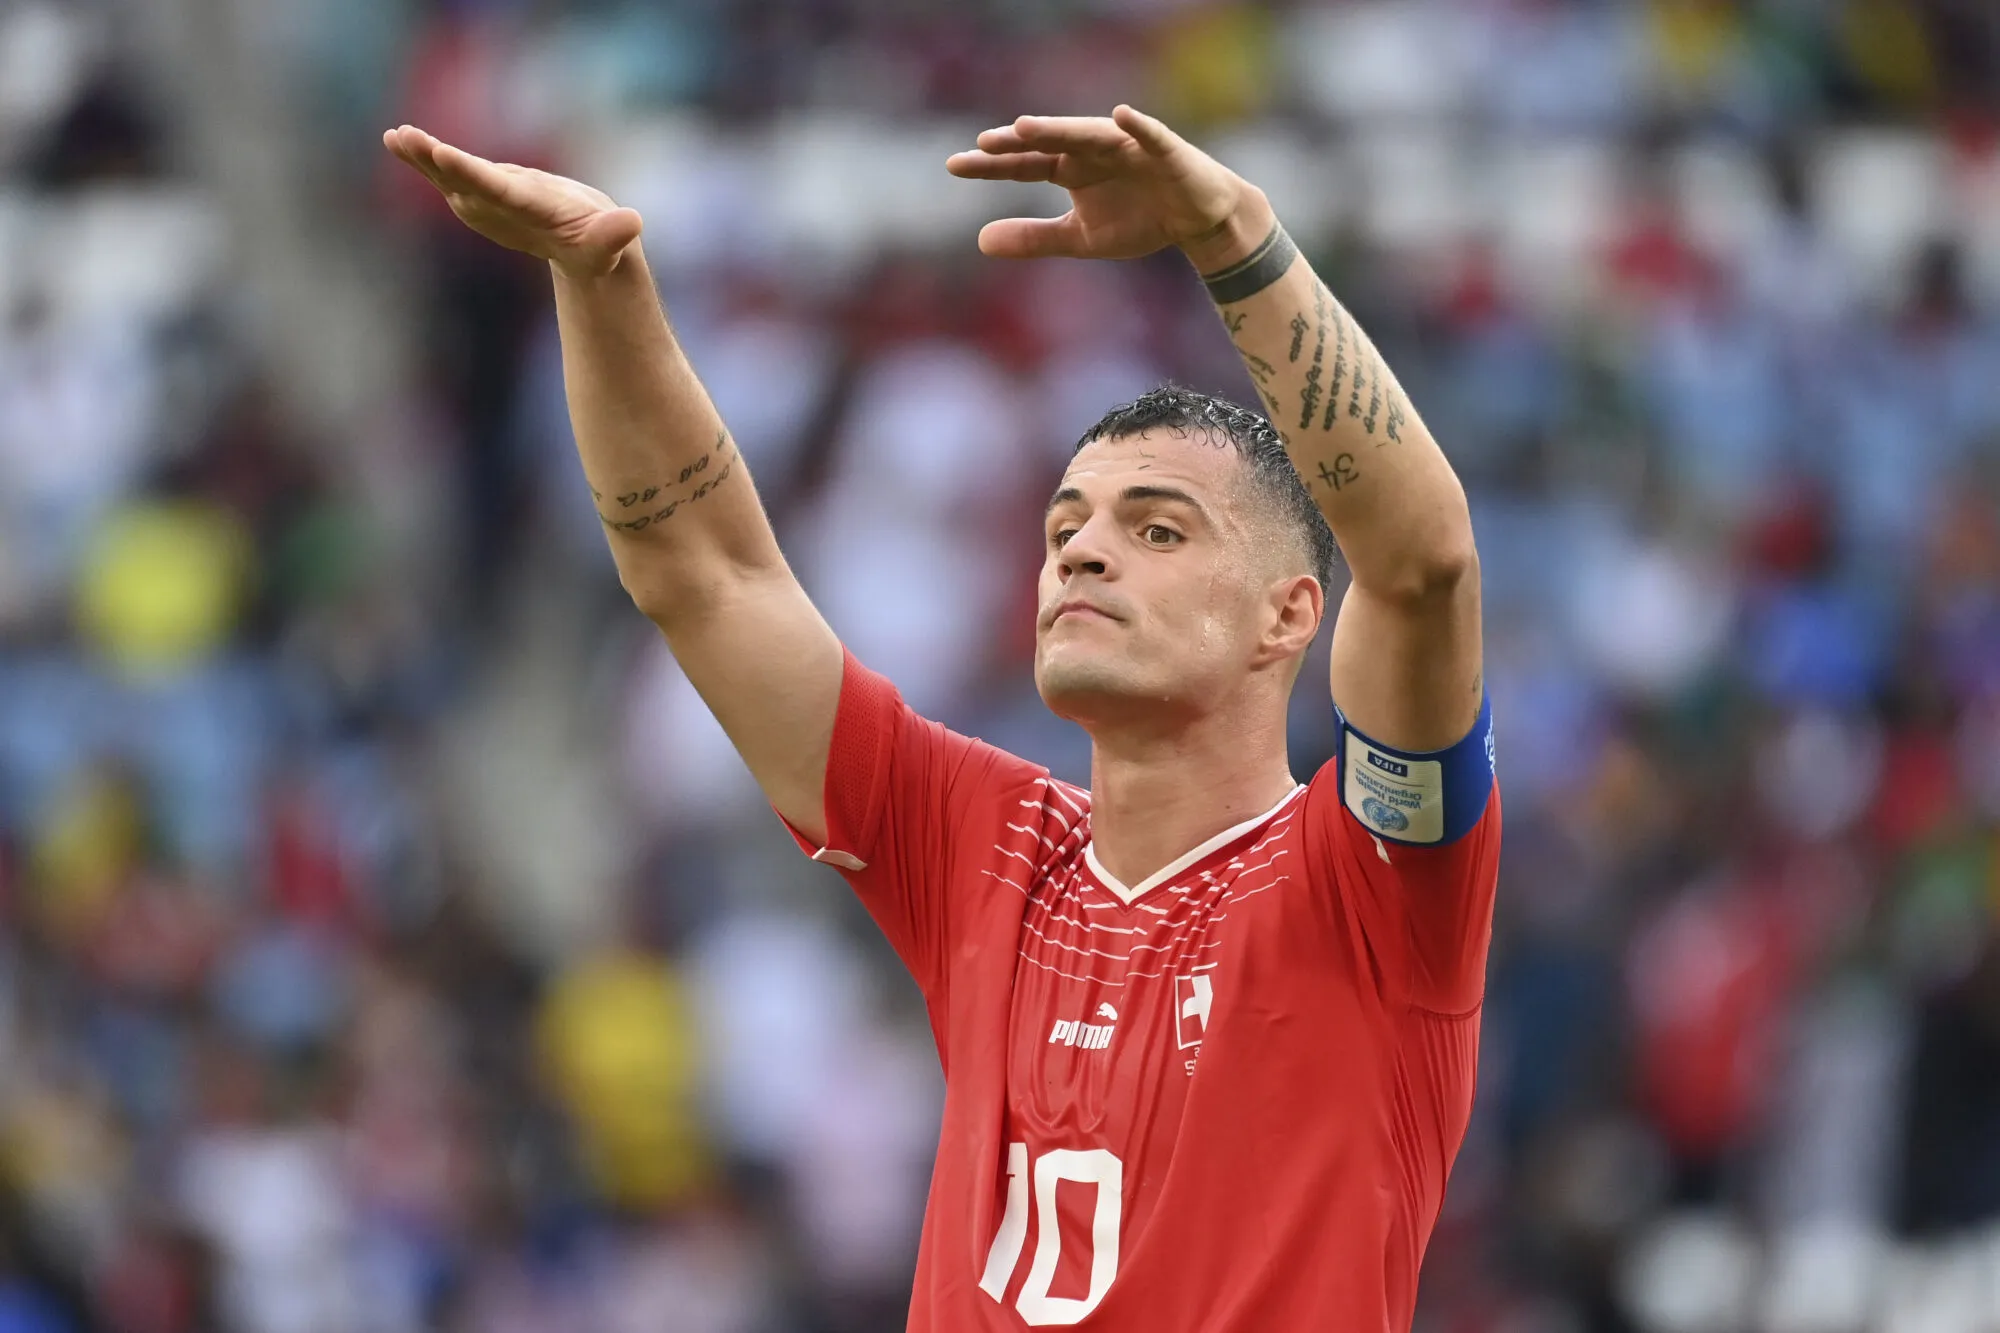 Granit XHAKA (SUI), gesture, gives instructions, action, single image, cut single motif, half figure, half figure. Switzerland (SUI) - Cameroon (CMR) 1-0 Group Stage Group G on 24/11/2022, Al Janoub Stadium. Soccer World Cup 2022 in Qatar from 20.11. - 18.12.2022 ? - Photo by Icon sport